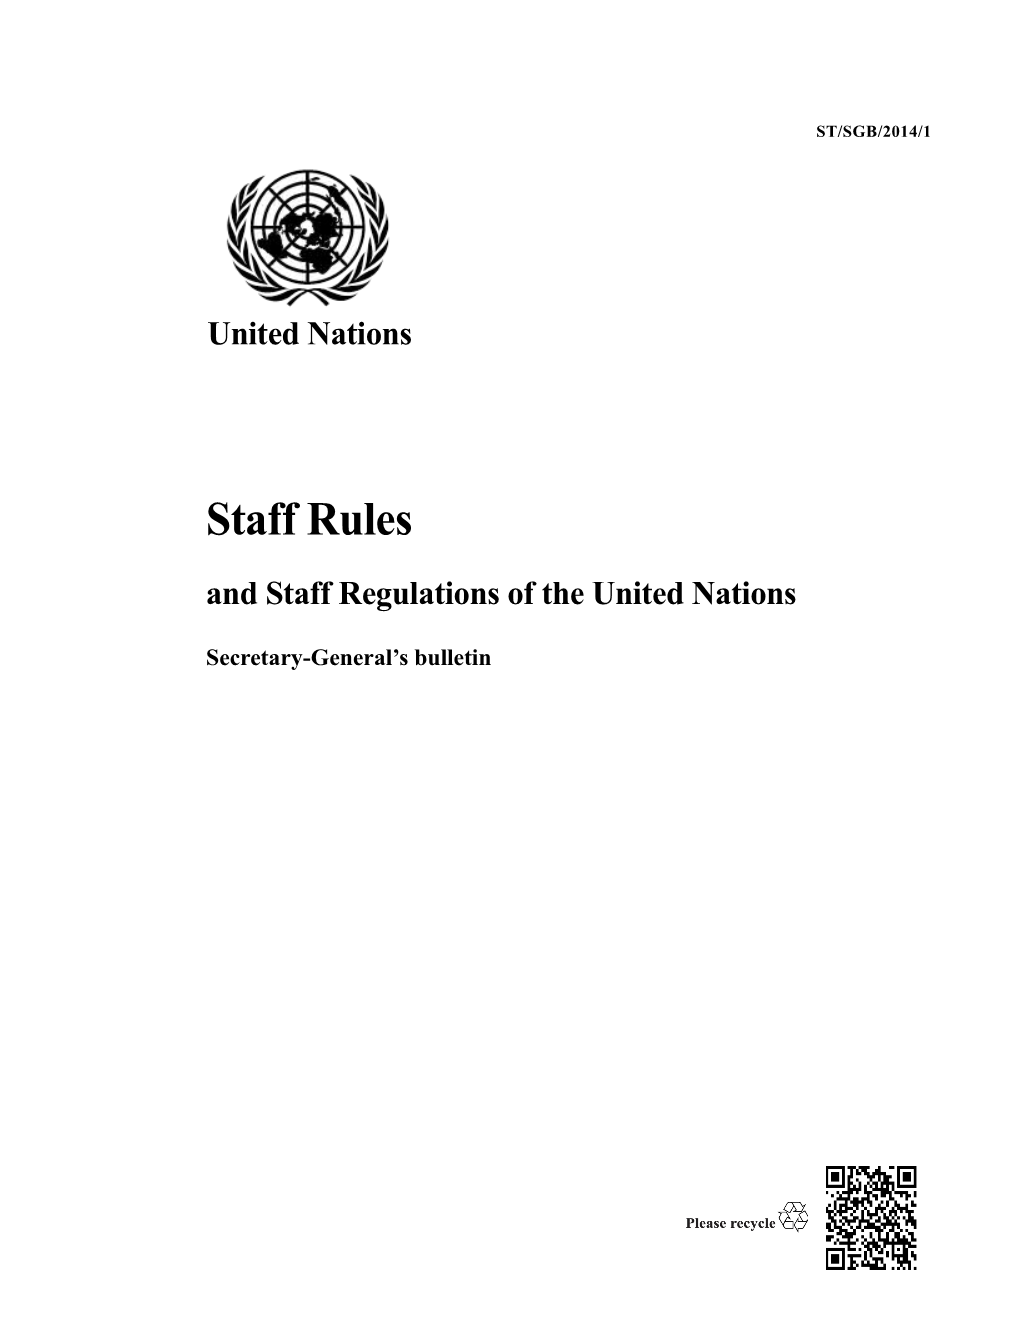 And Staff Regulations of the United Nations